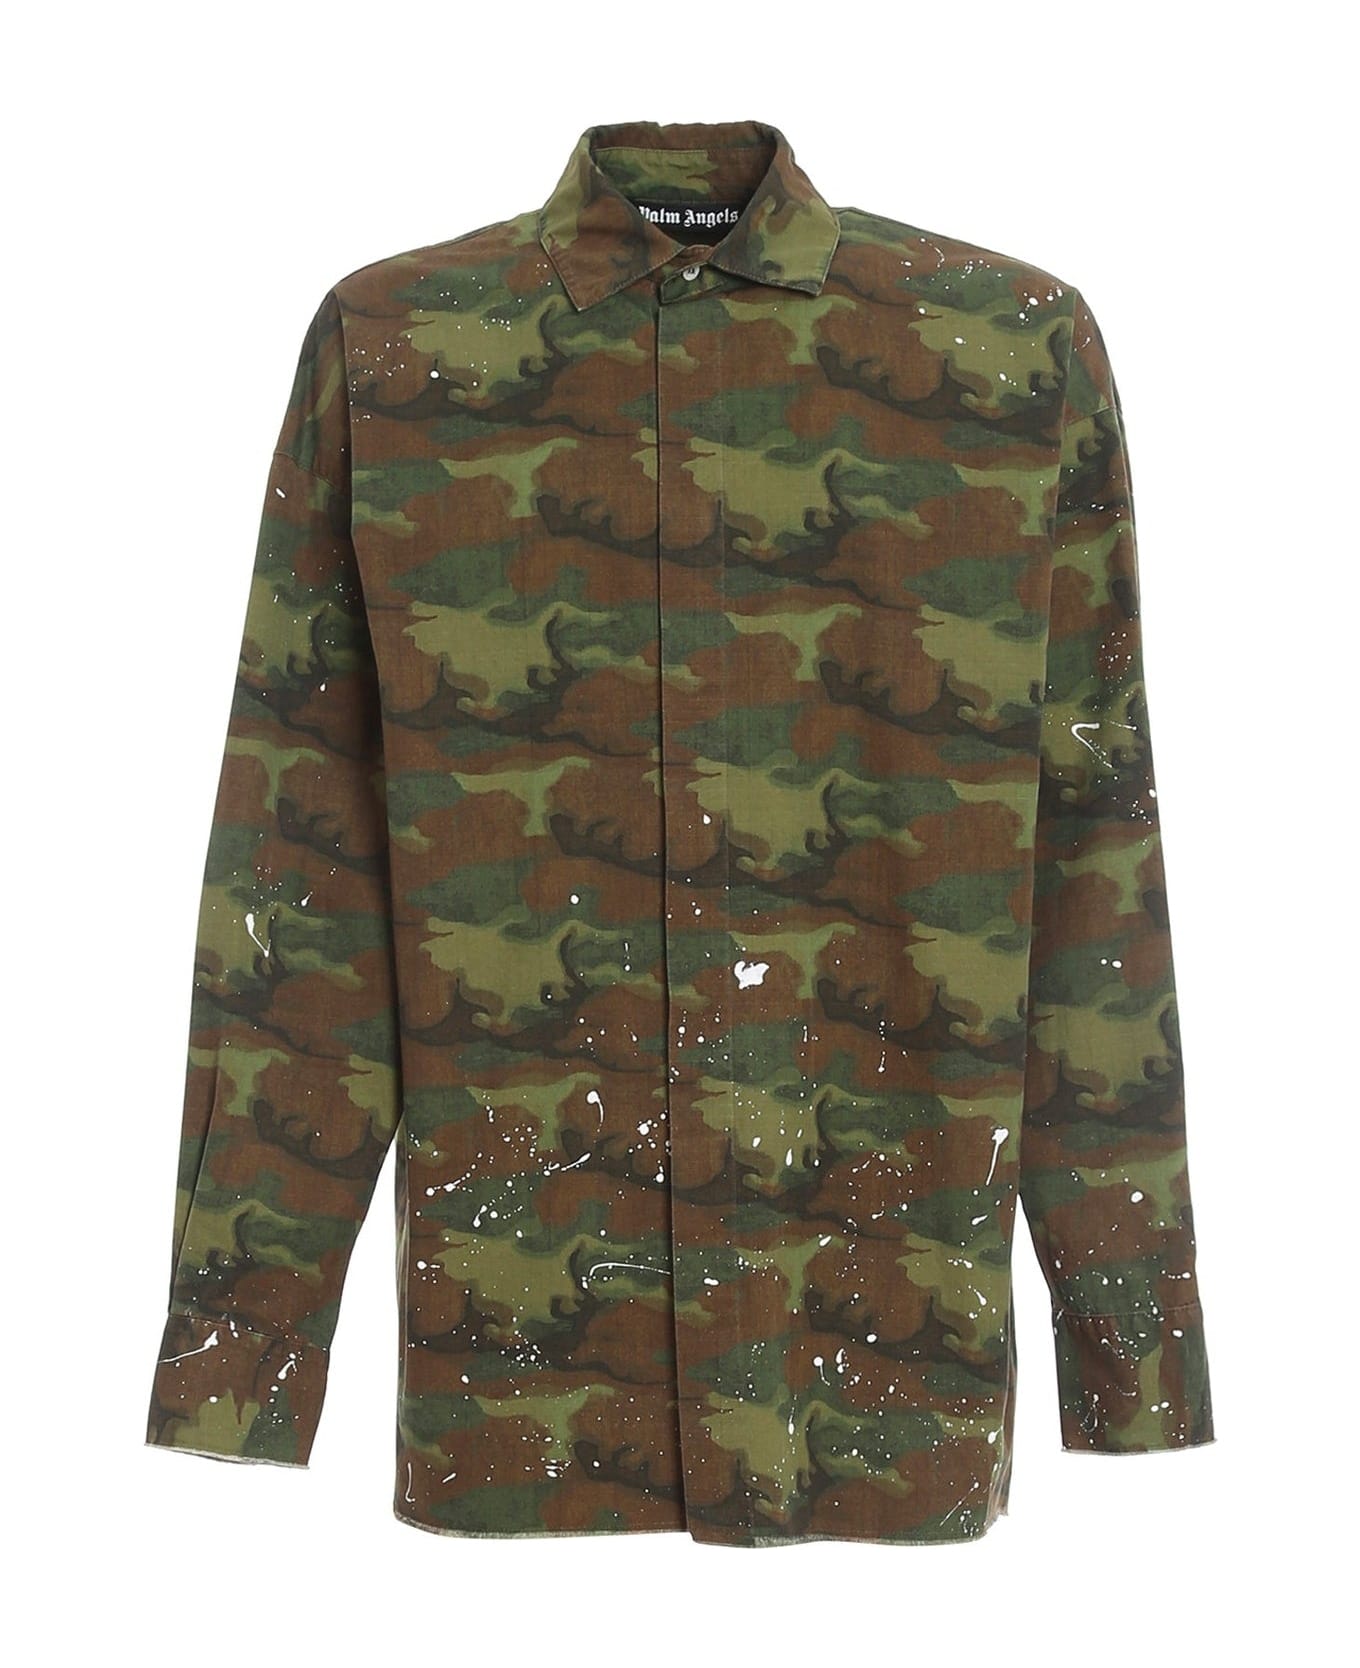 Palm Angels Camouflage Print Shirt - Green